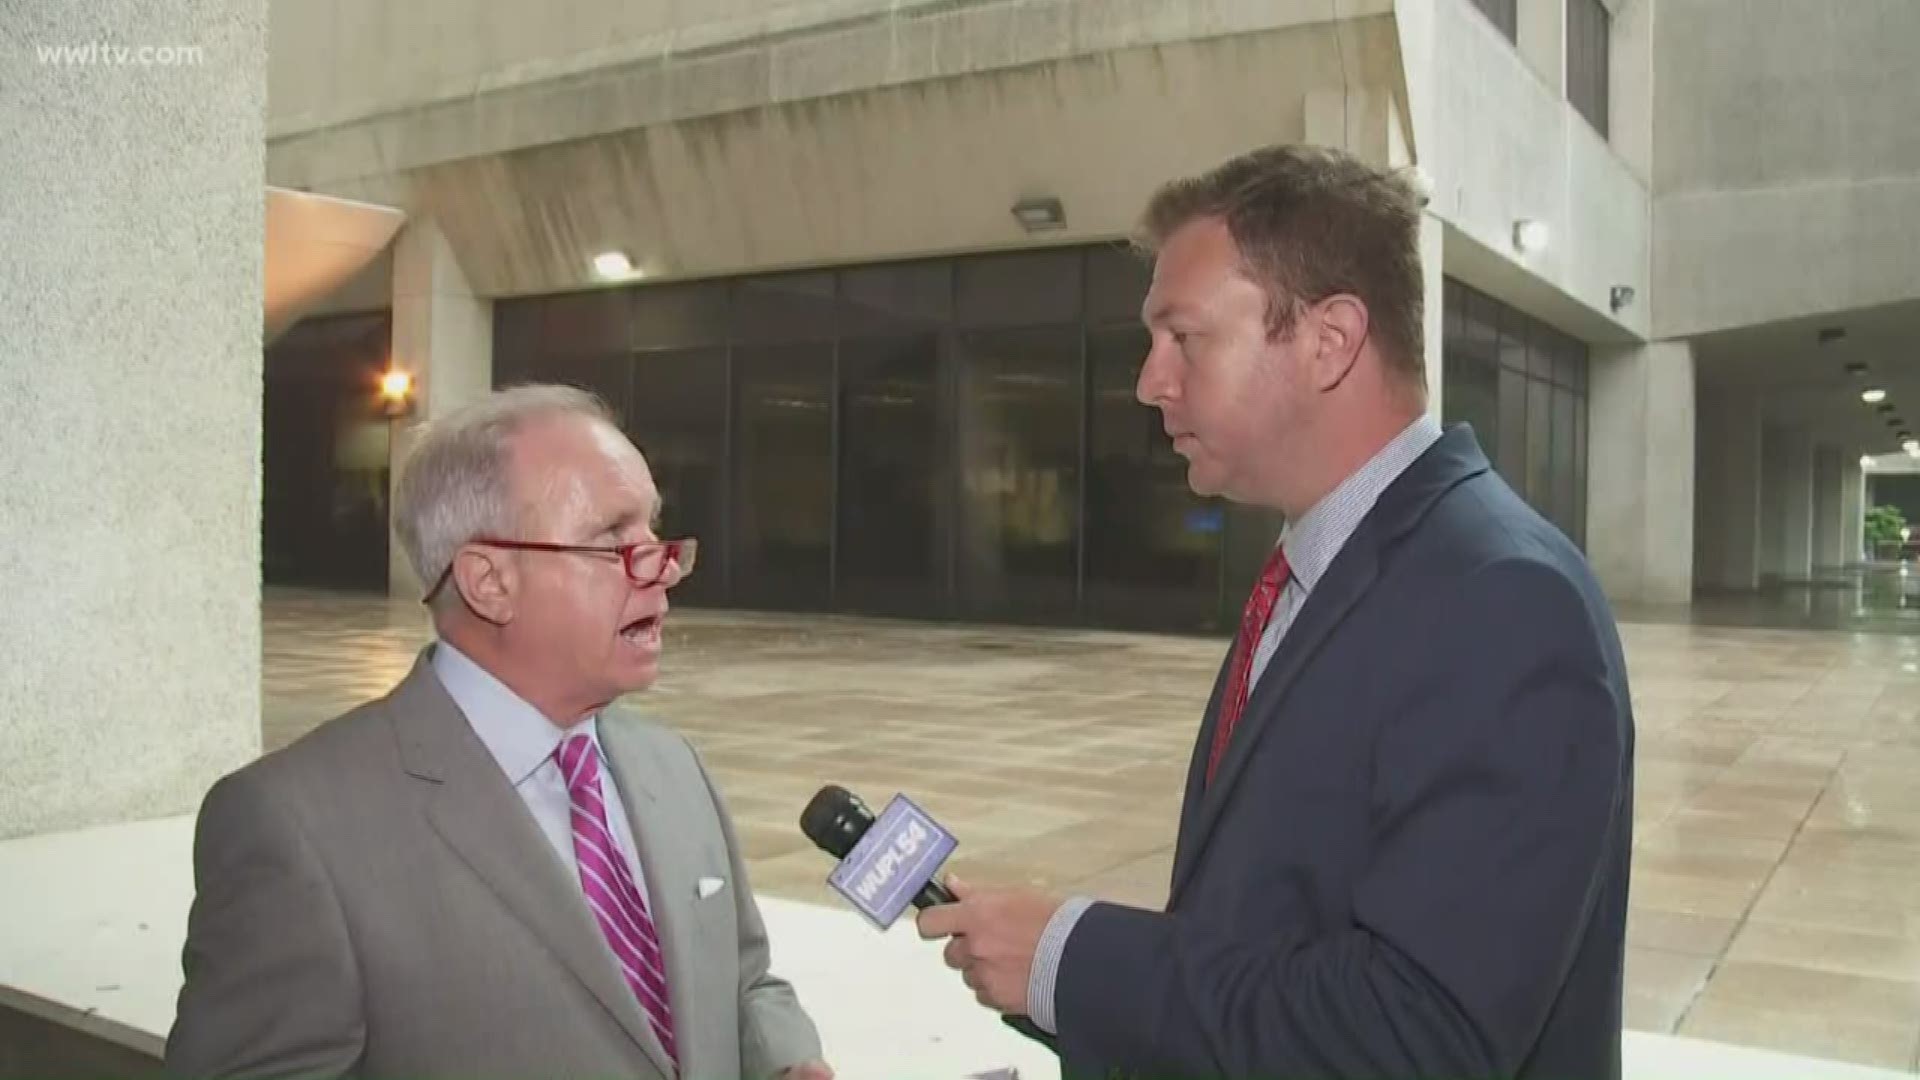 WWL-TV legal analyst Donald 'Chick' Foret breaks down the charges against former Jefferson Parish Councilman Chris Roberts.